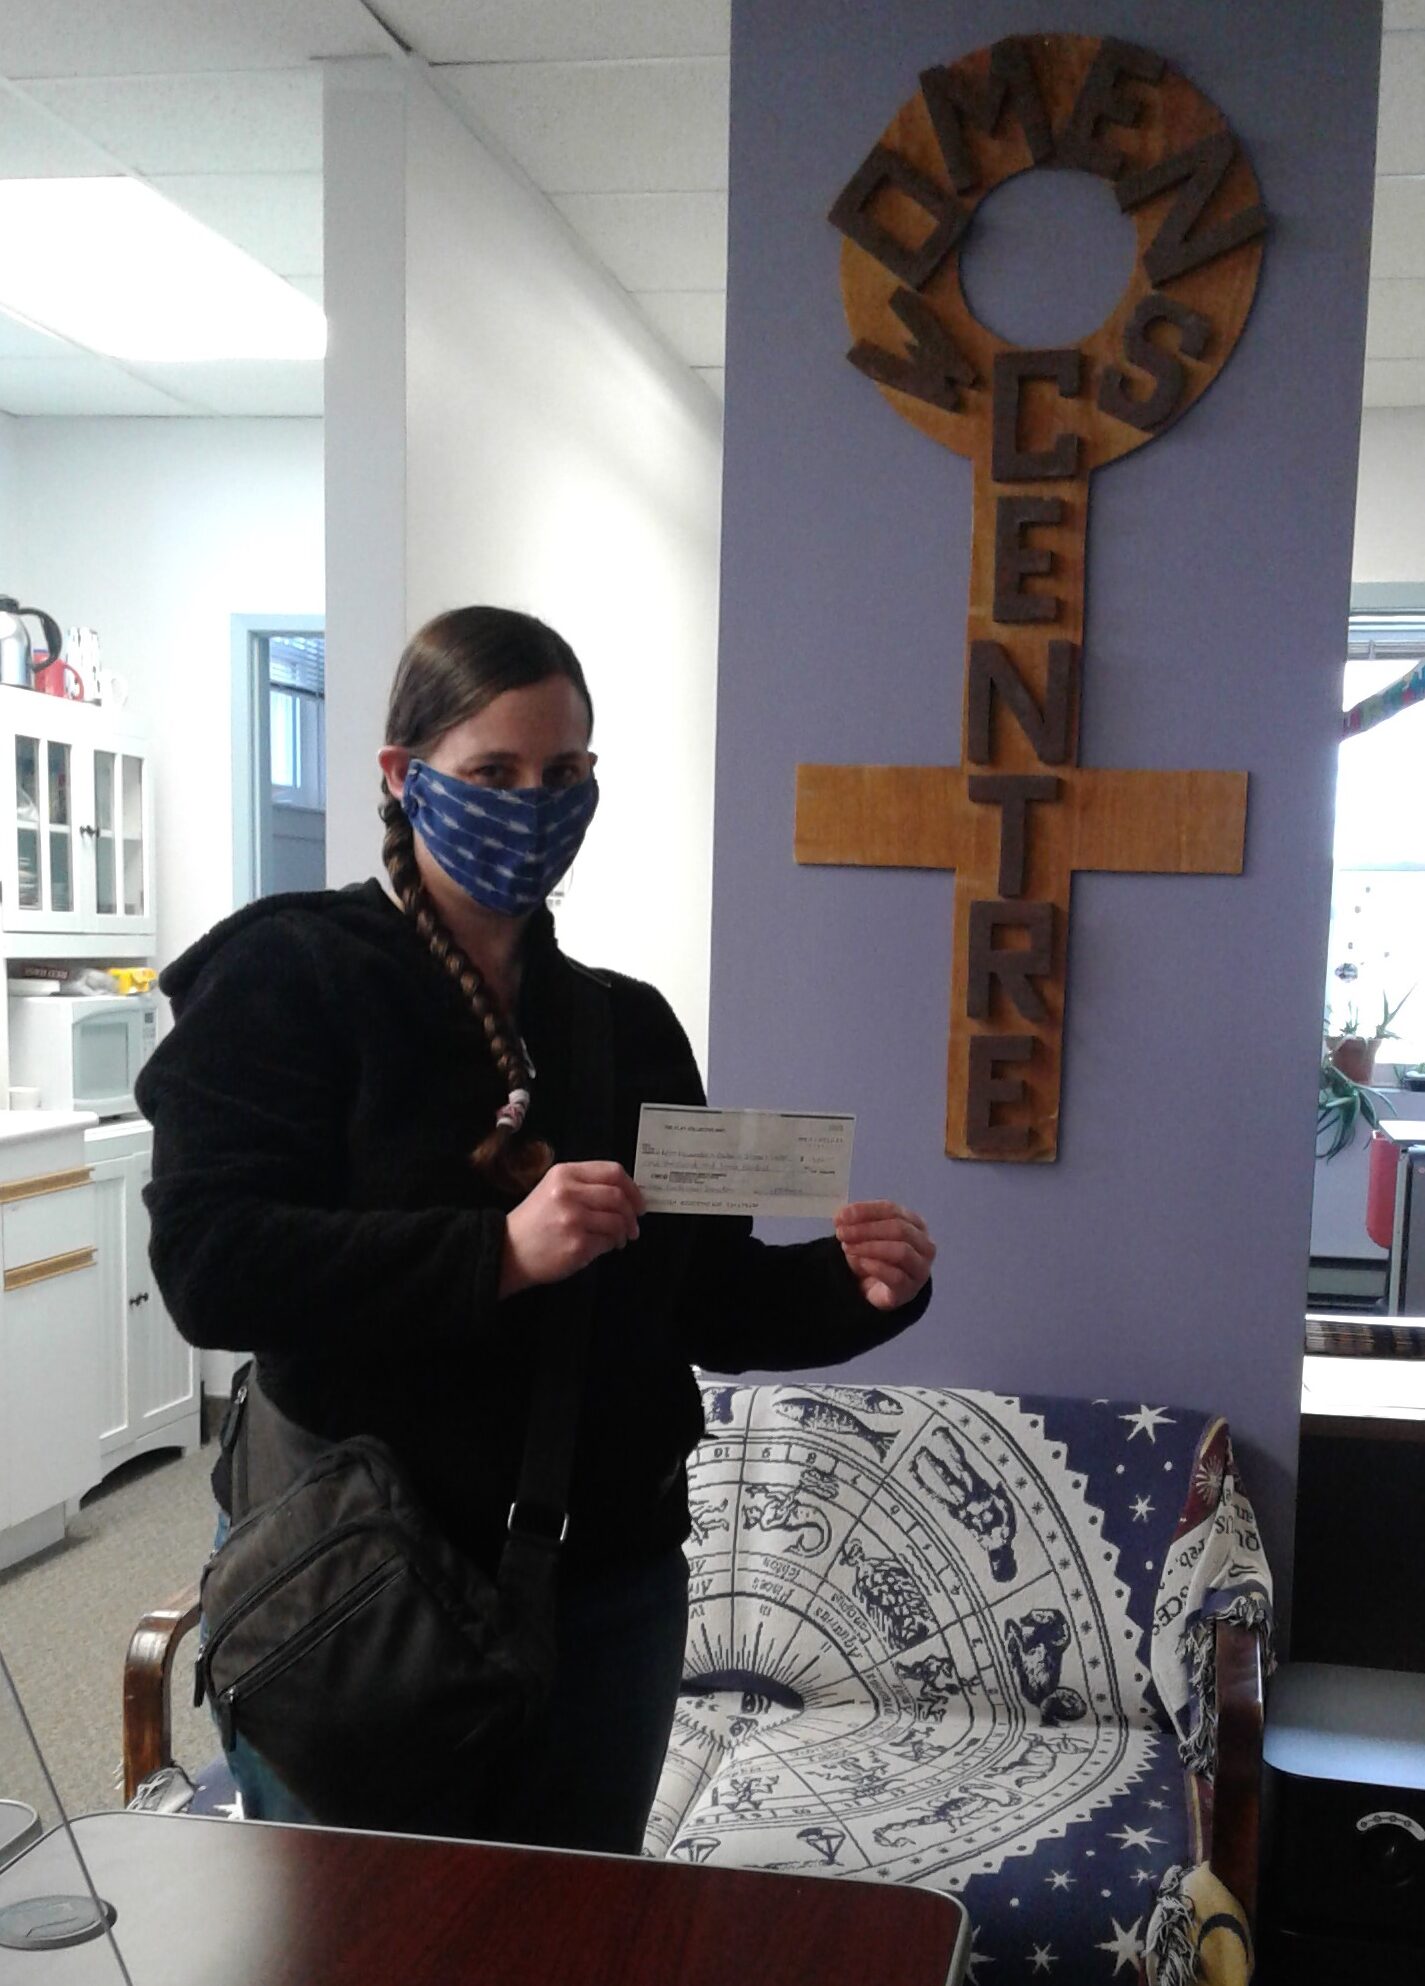 A member of Clay Collective delivering donation cheque to the Women’s Centre.